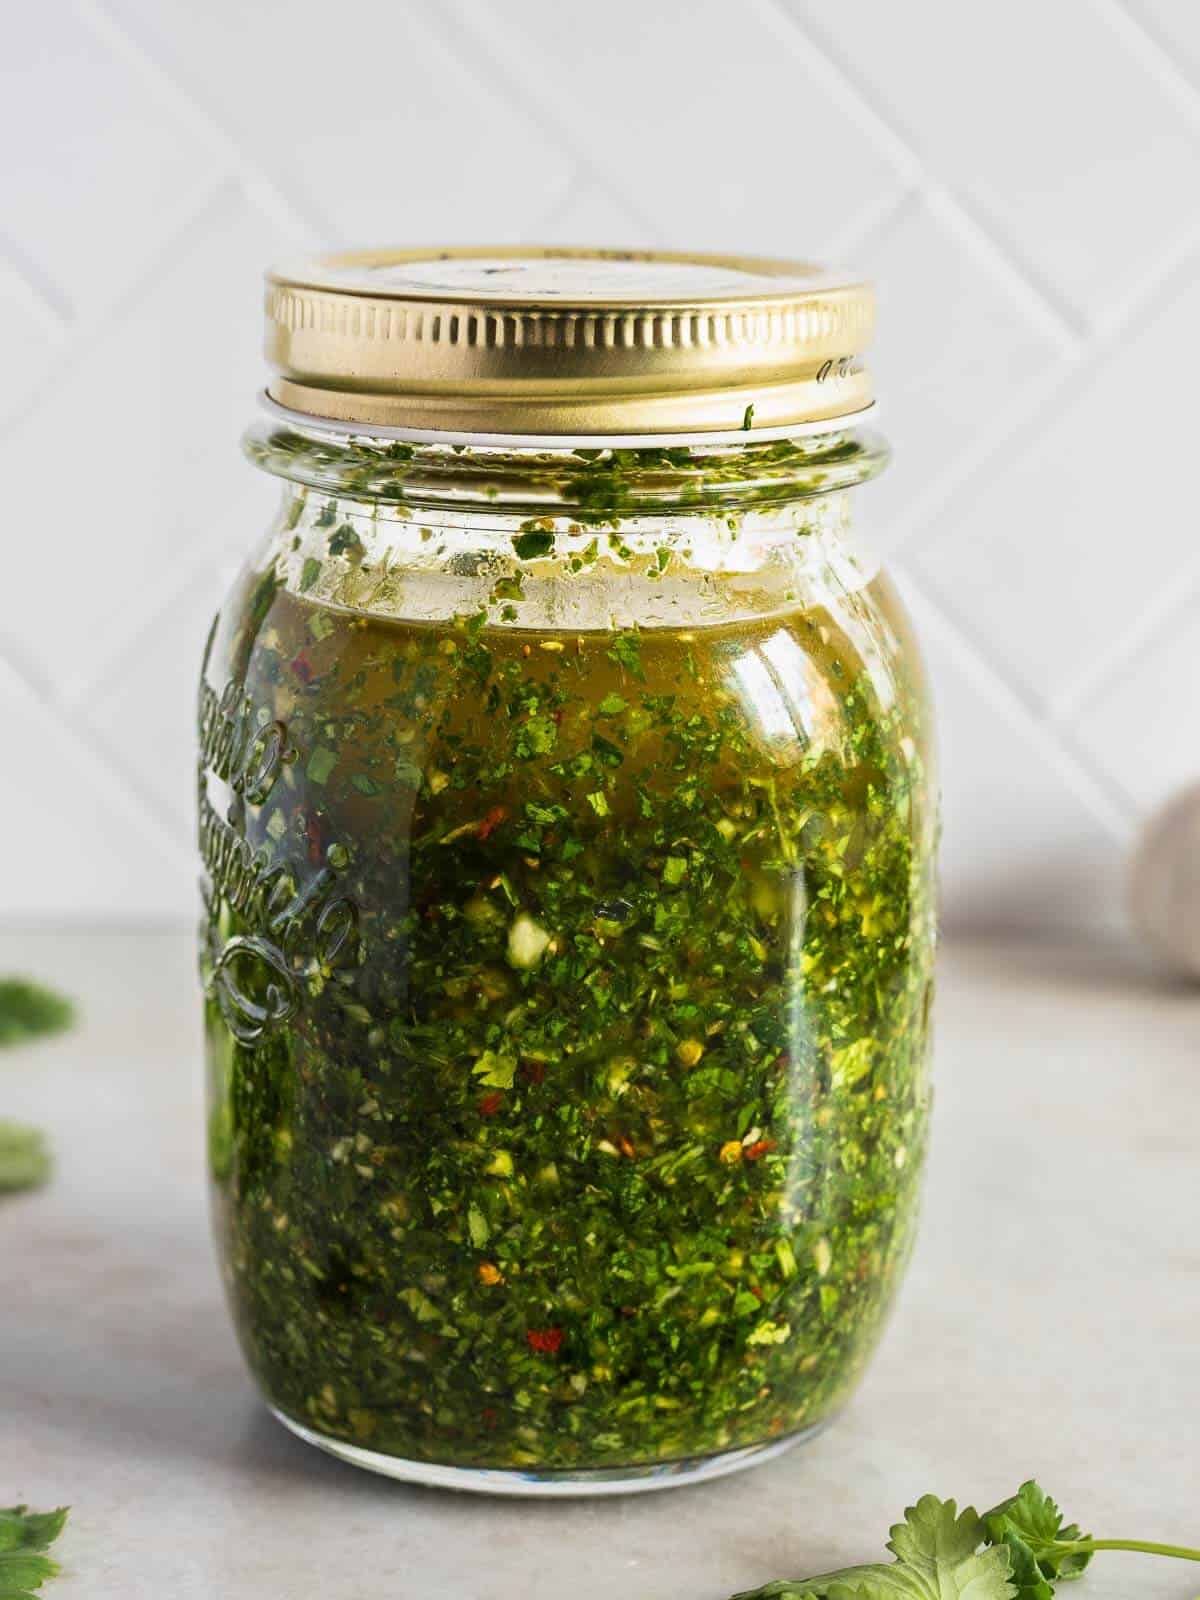 all chimichurri ingredients combined in a mason jar.